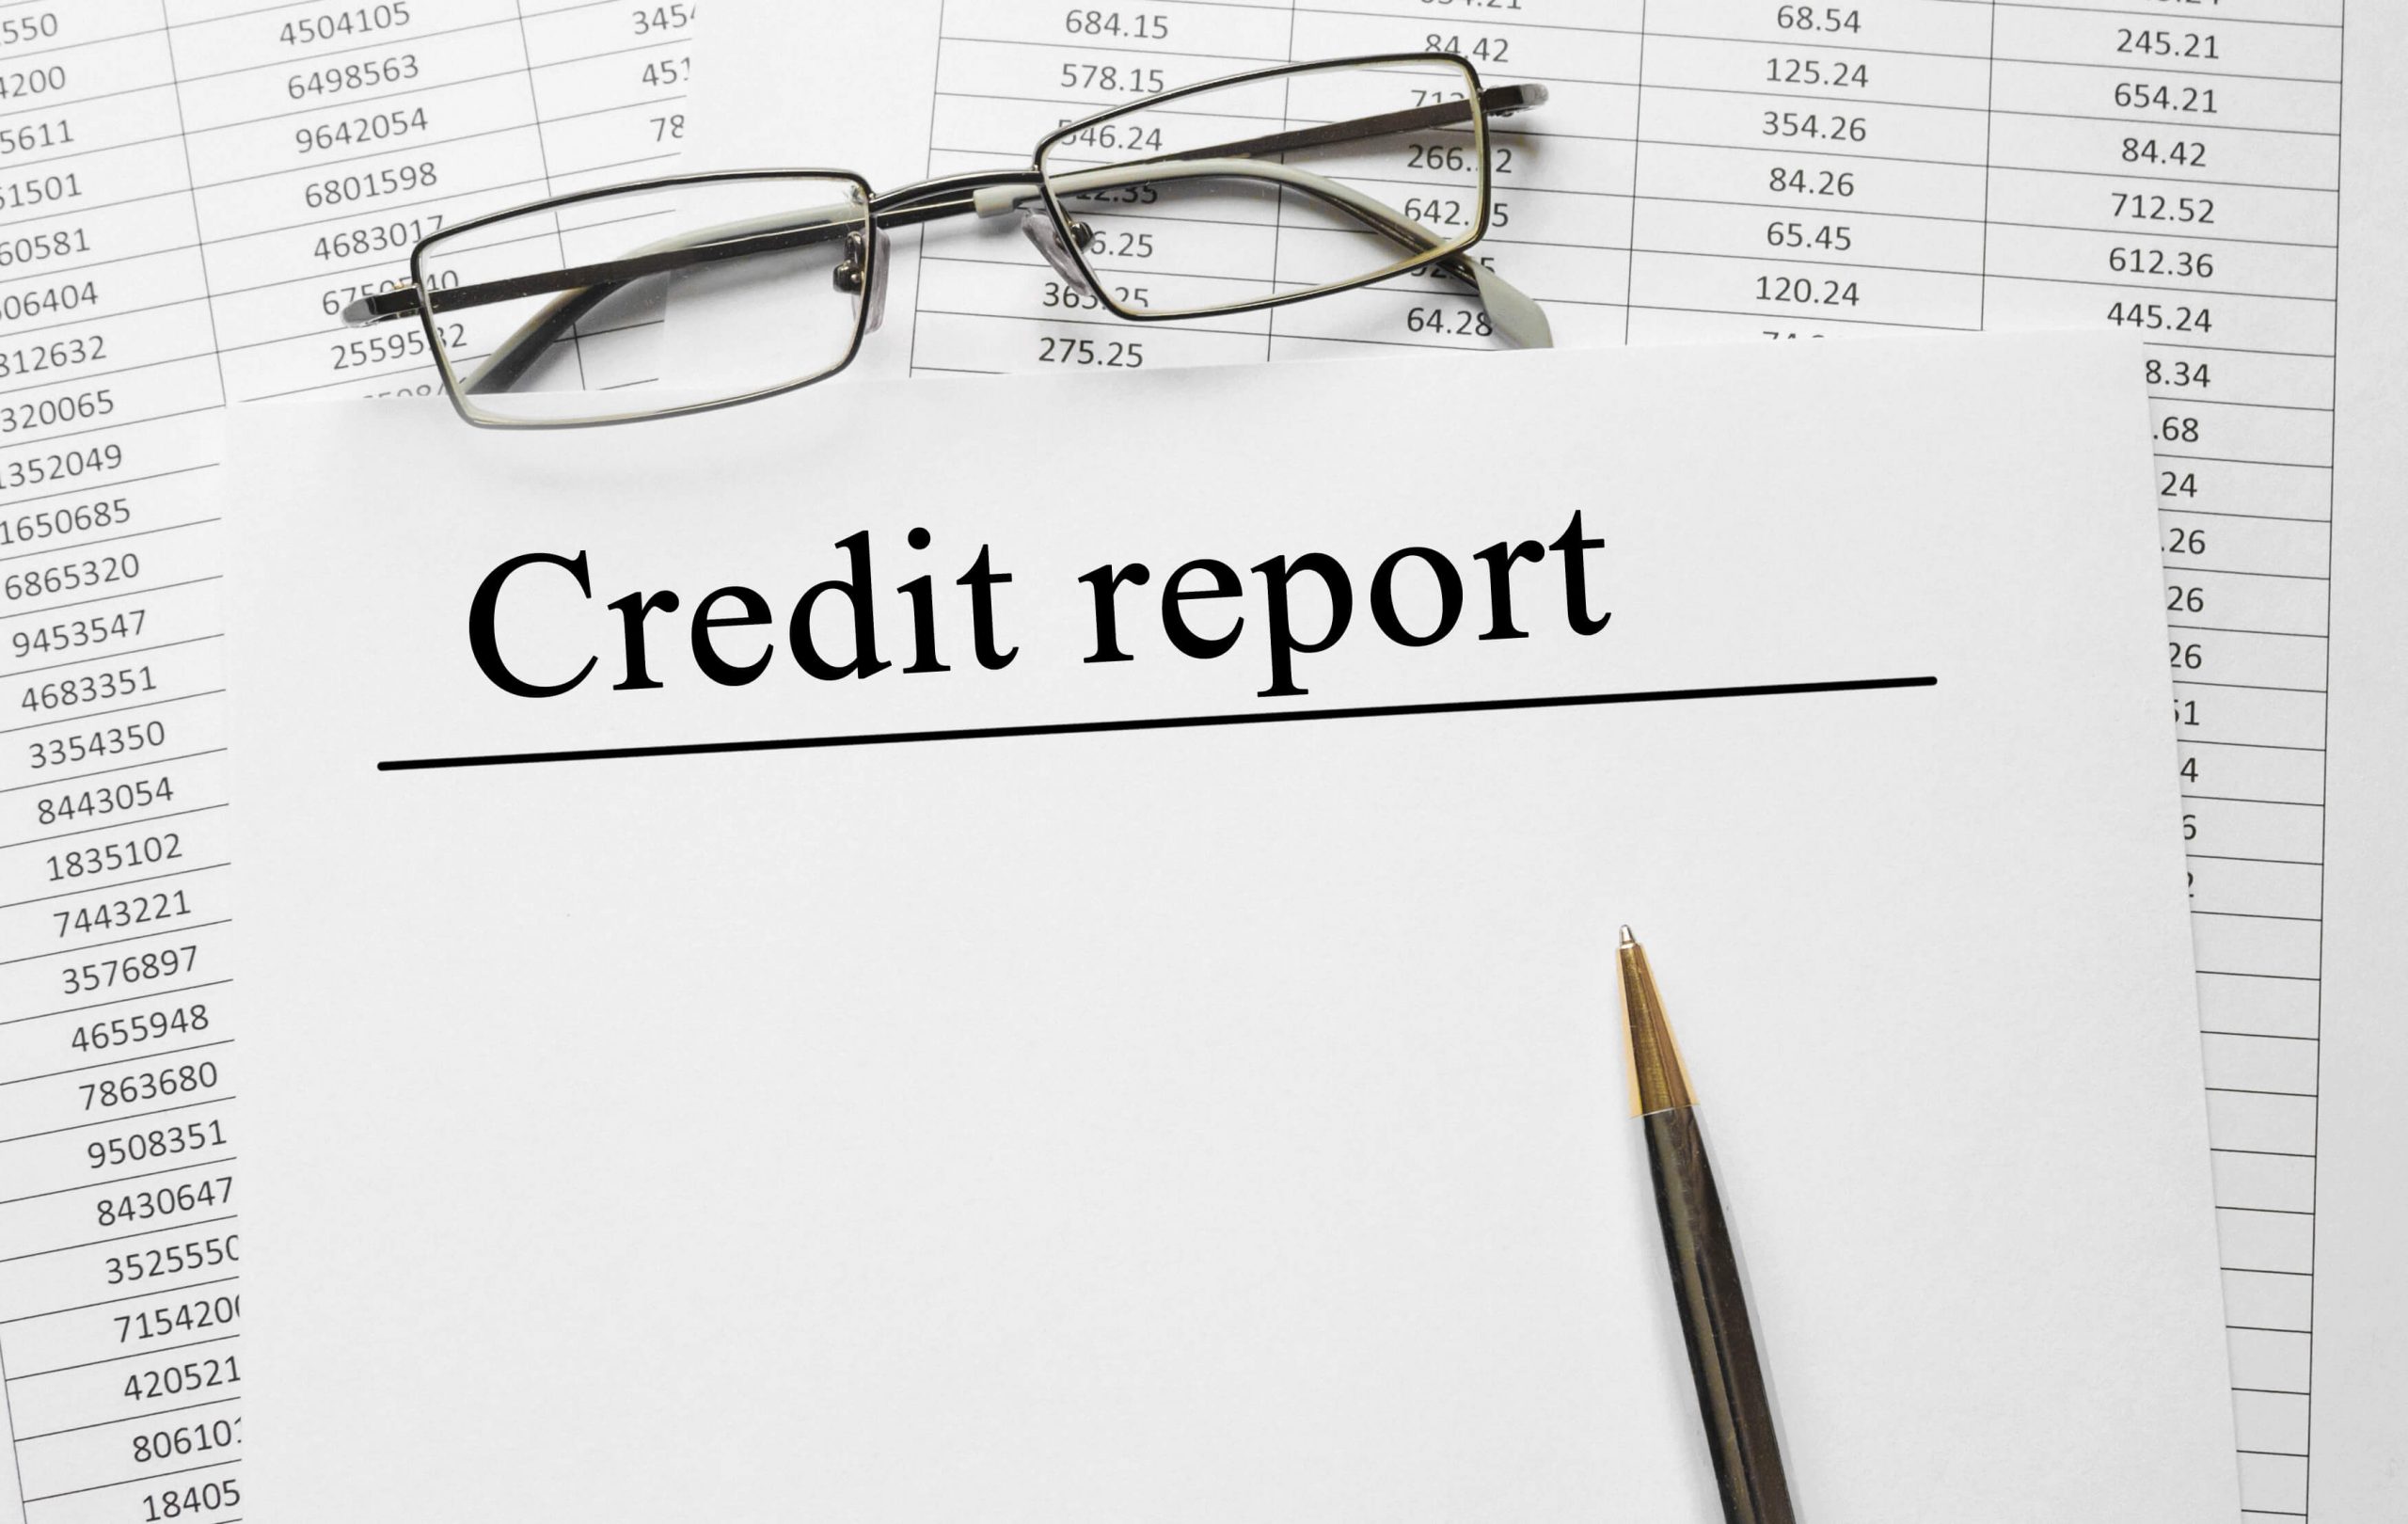 A credit report of a financial institution